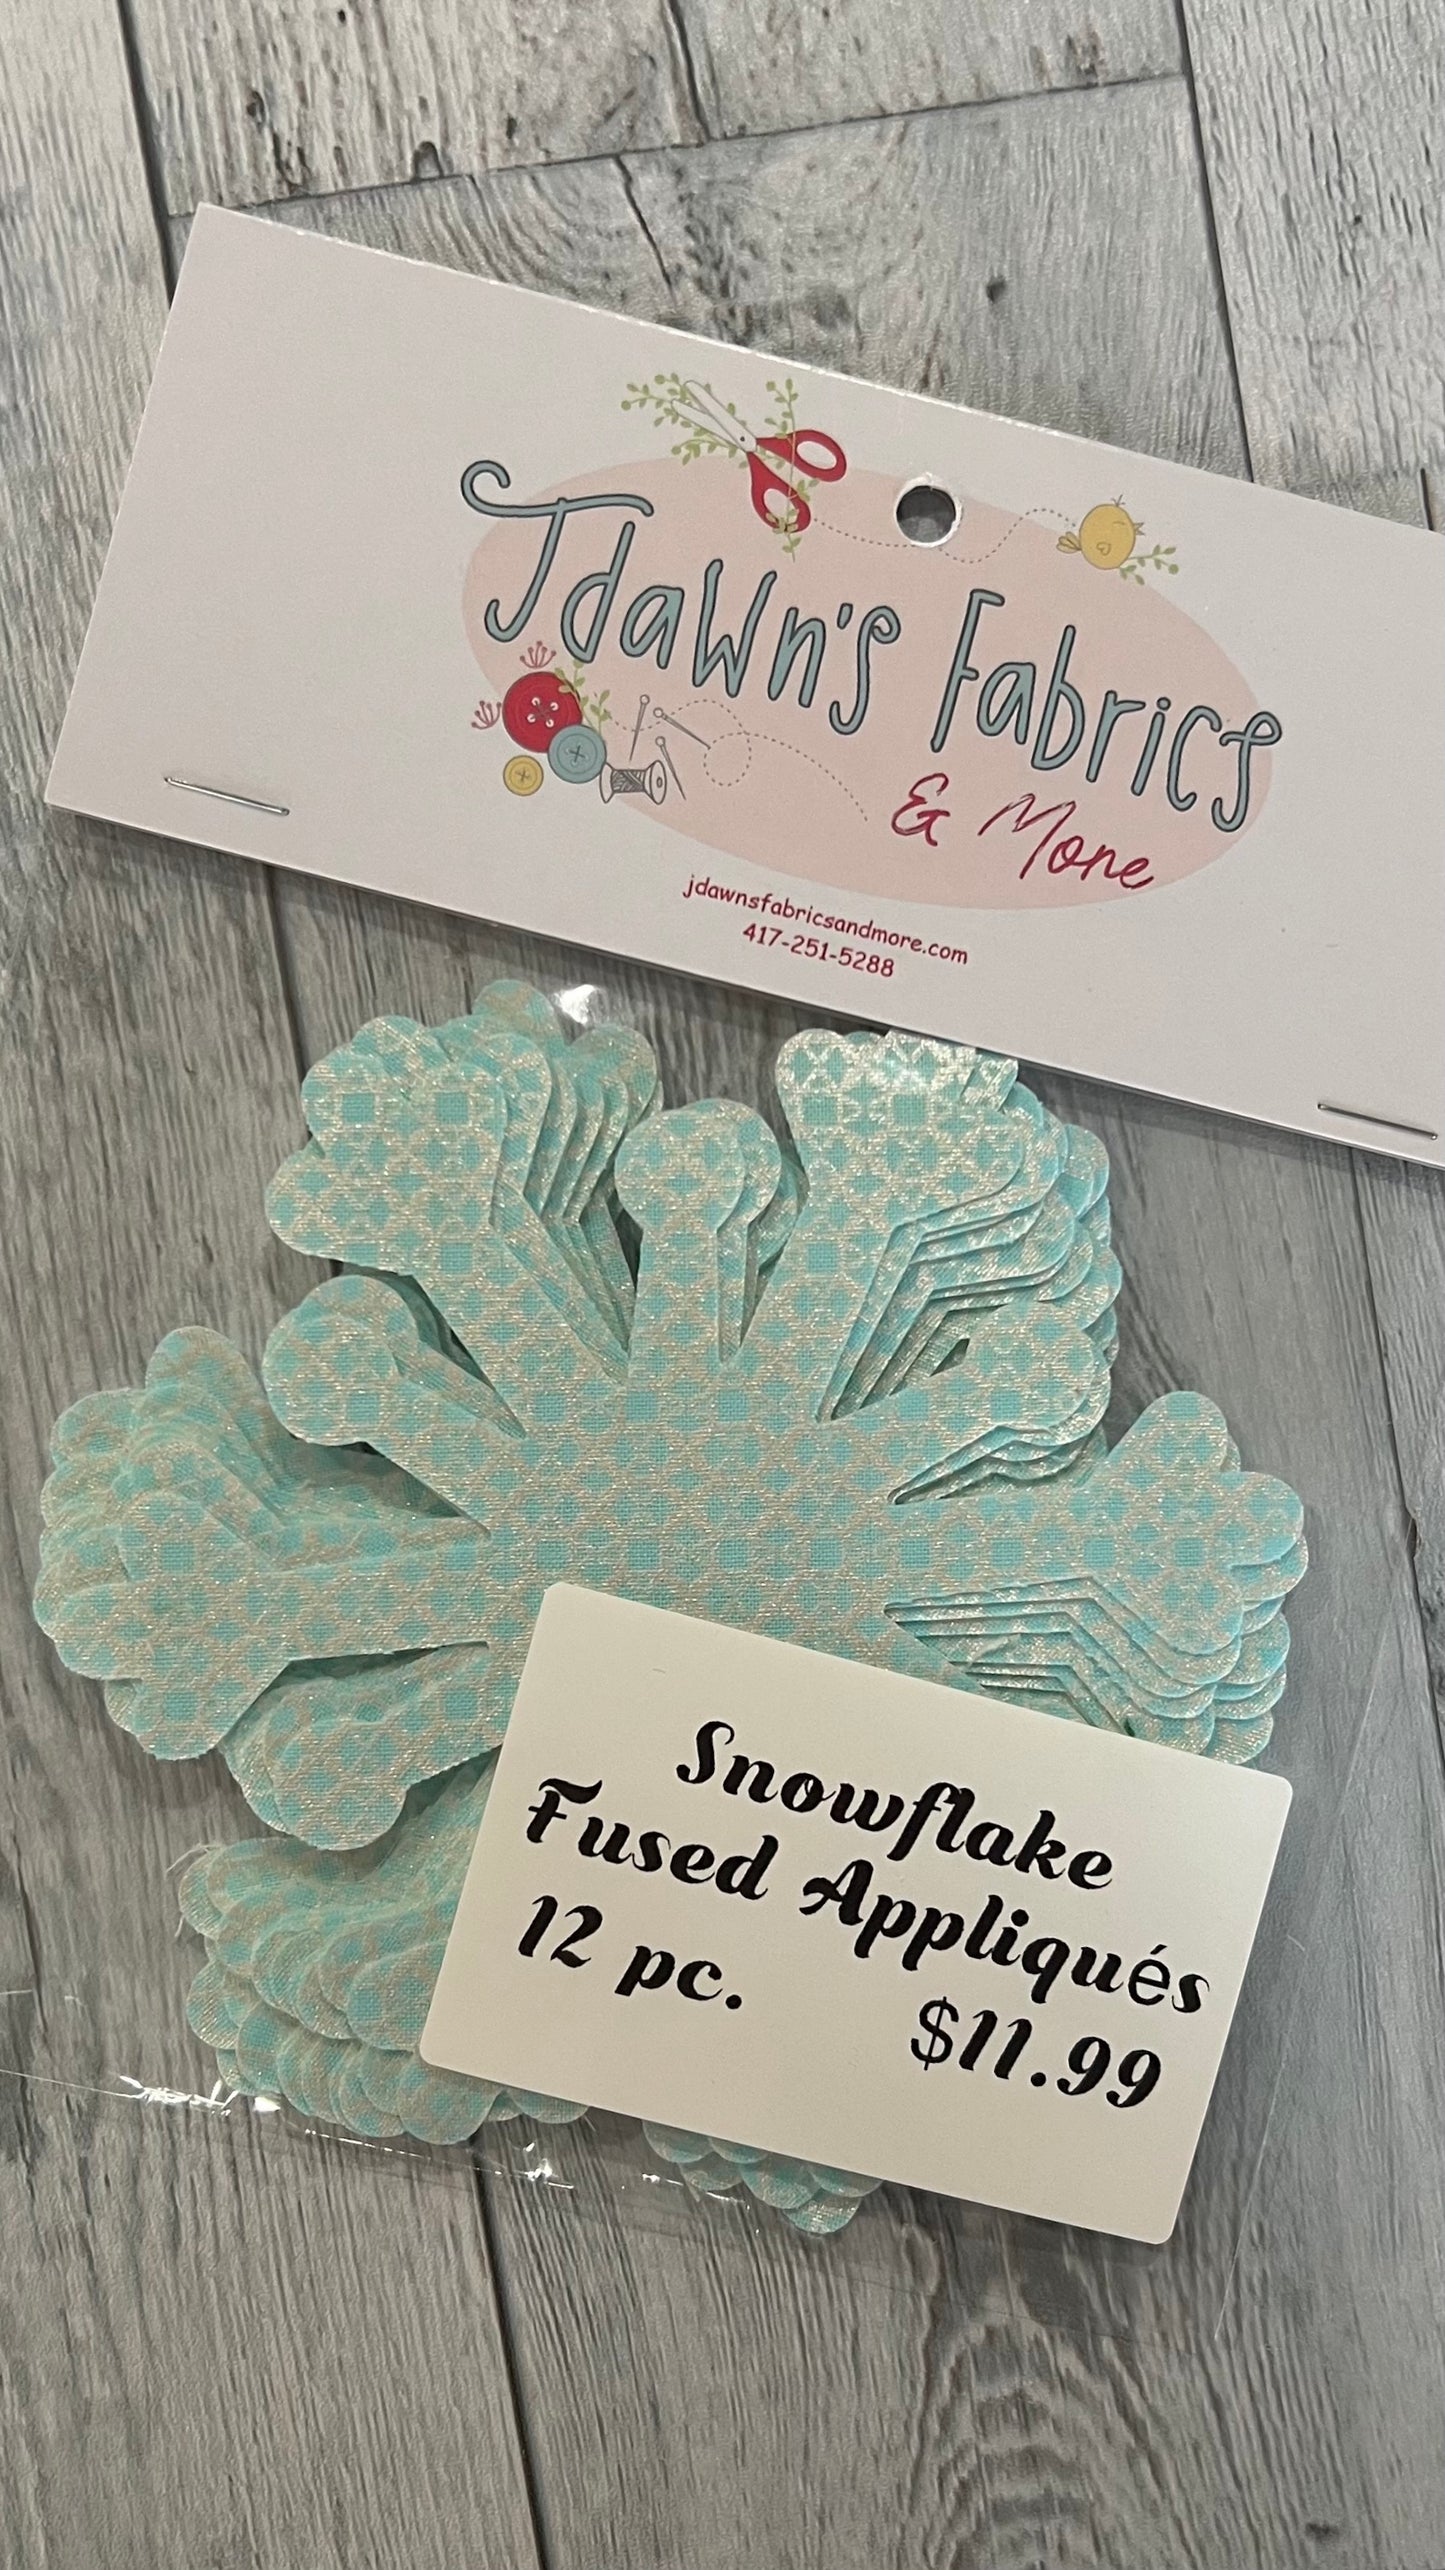 Snowflake Fused Appliques: Choice of Quantity